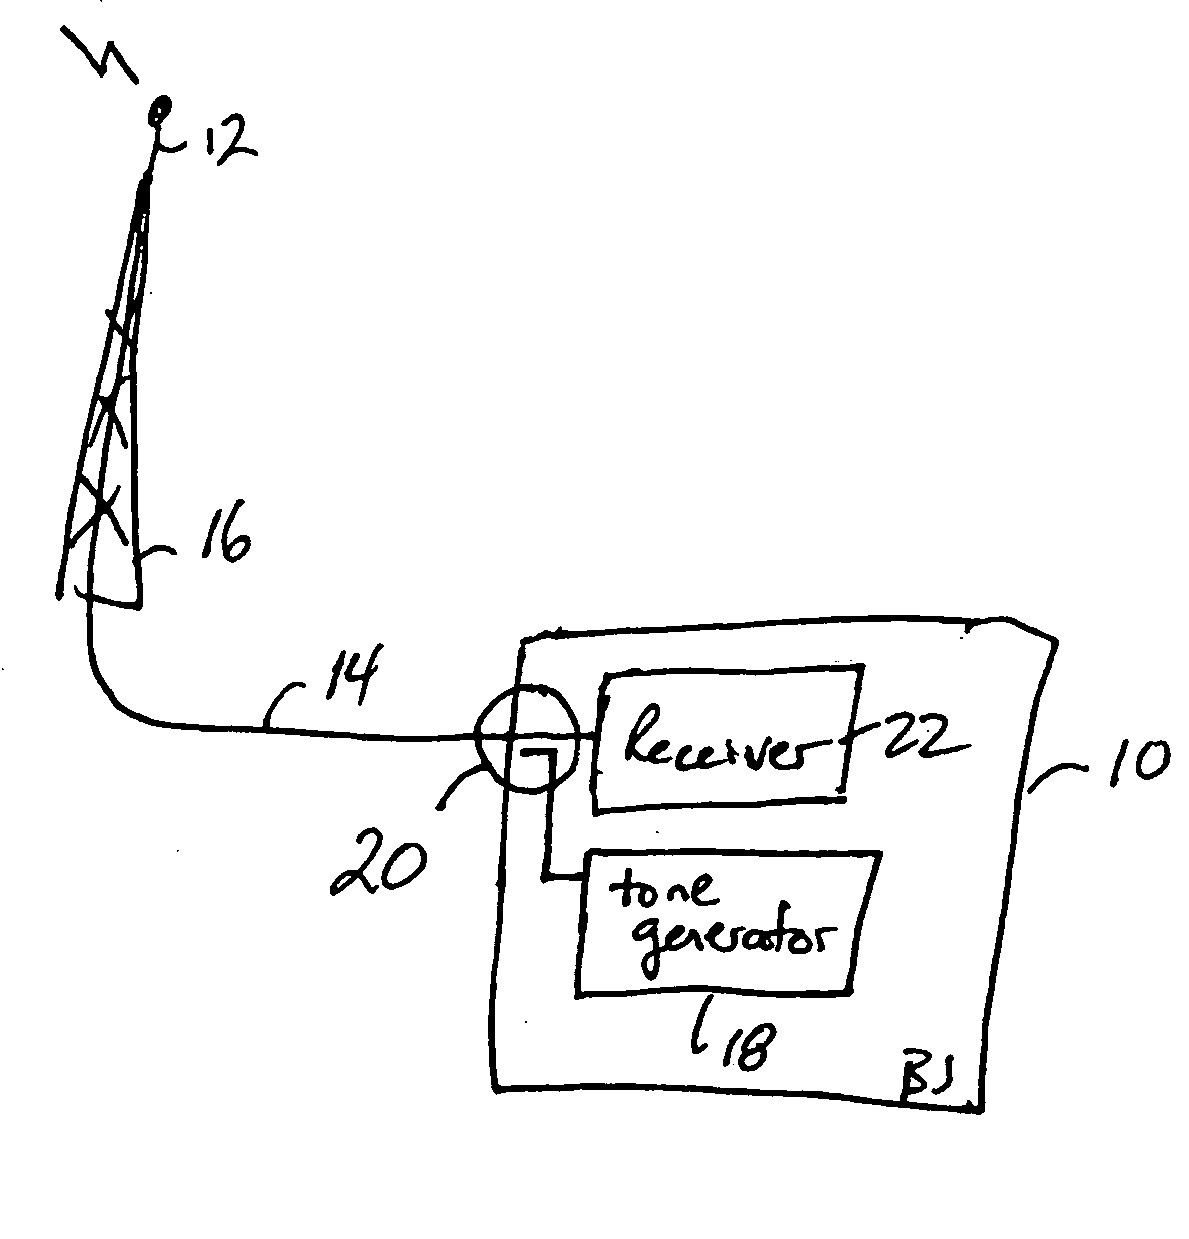 Method and apparatus for determining at least an indication of return loss of an antenna